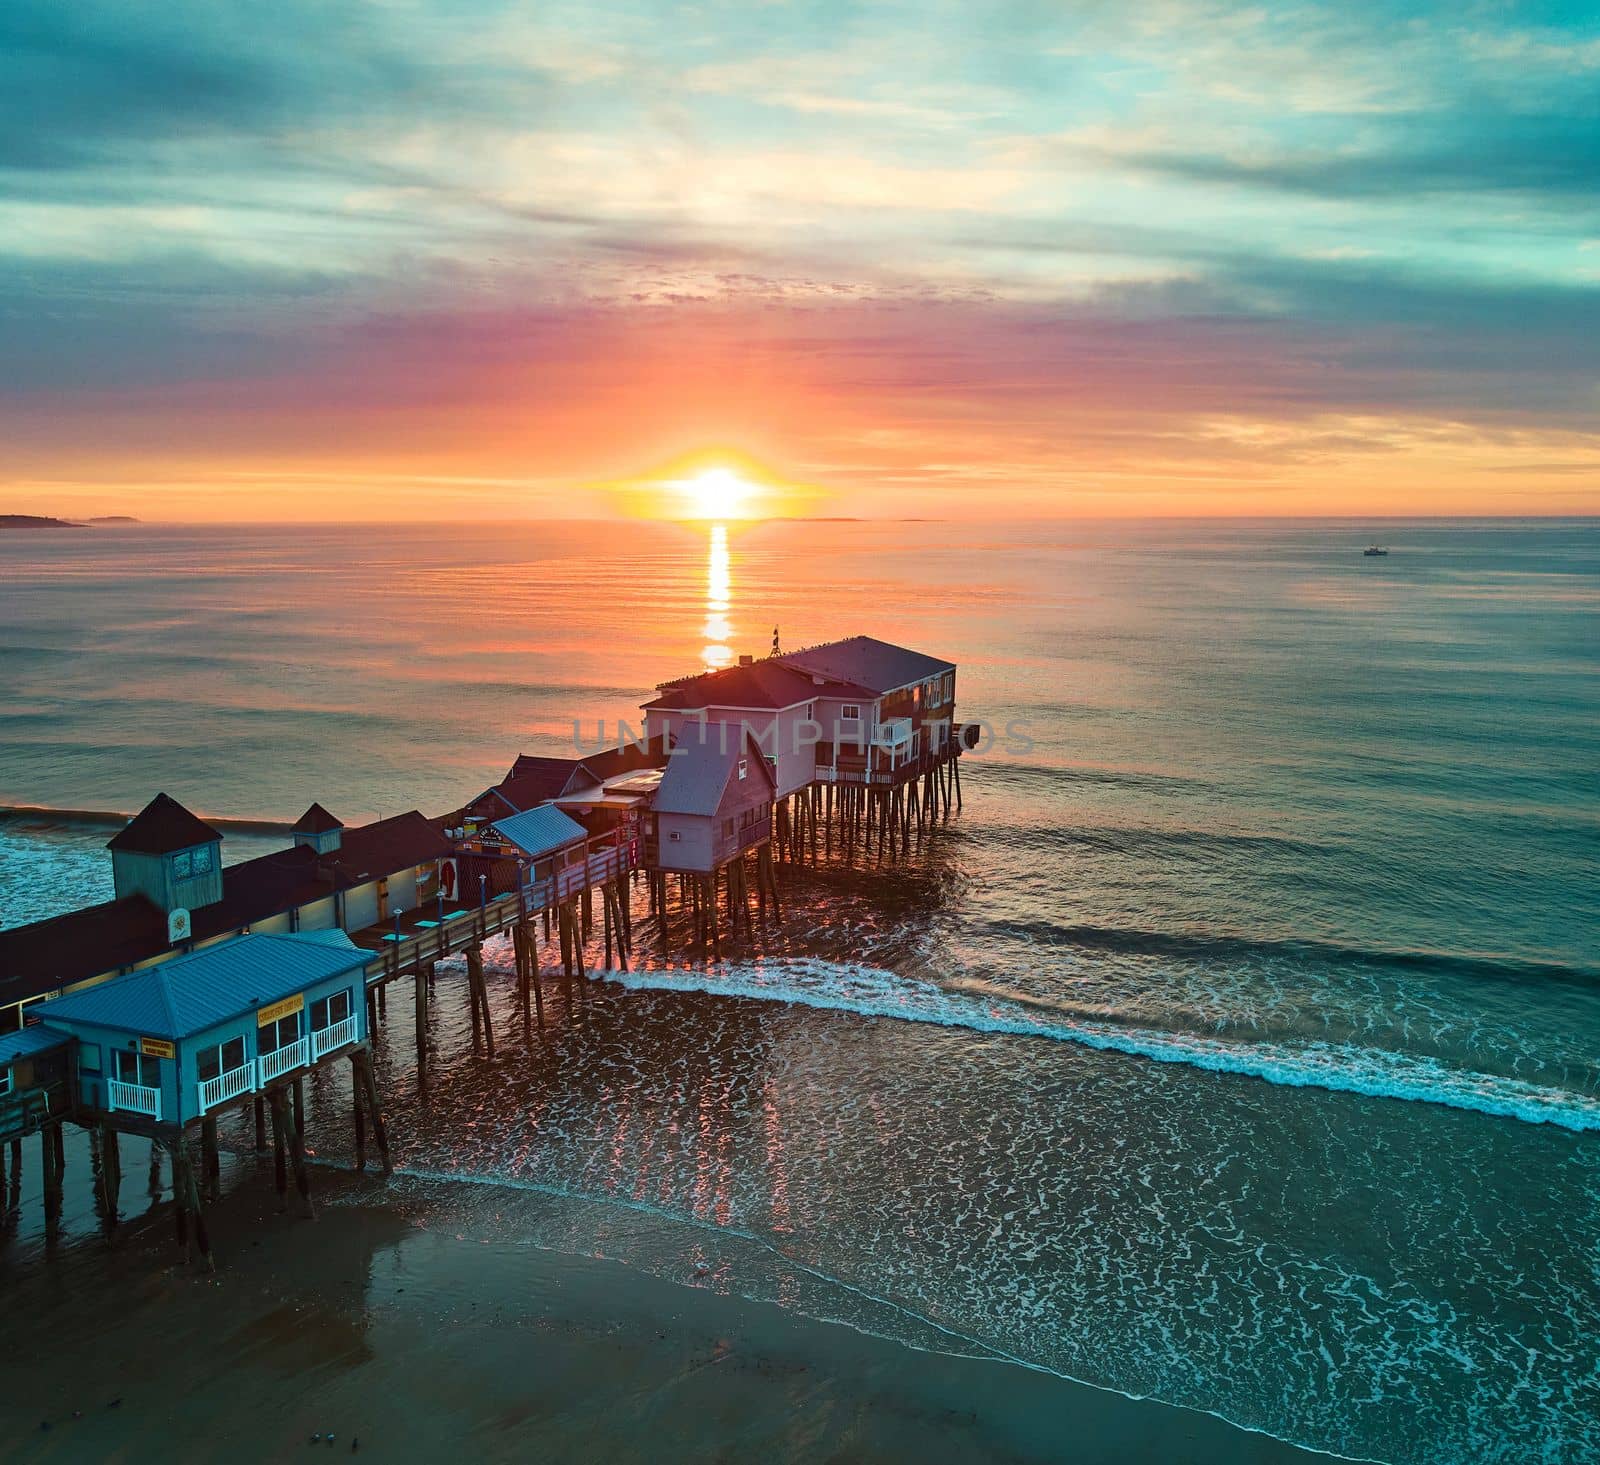 Image of Golden sunrise over Maine ocean coast with old wood pier covered in shops